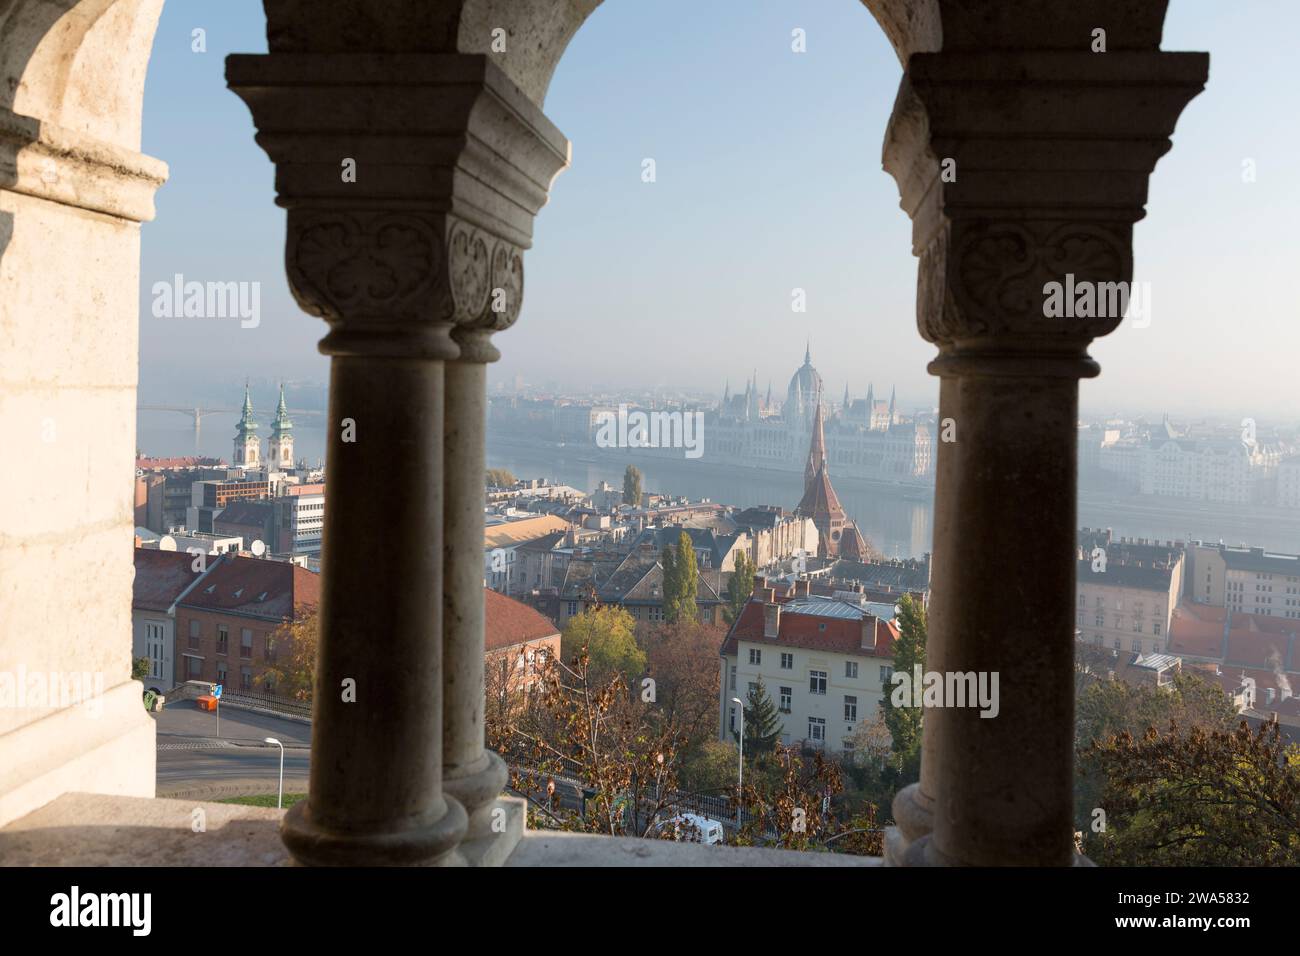 Hungary, Budapest, view across Budapest and the river Danube towards the Parliament building from the Fisherman's Bastion. Stock Photo